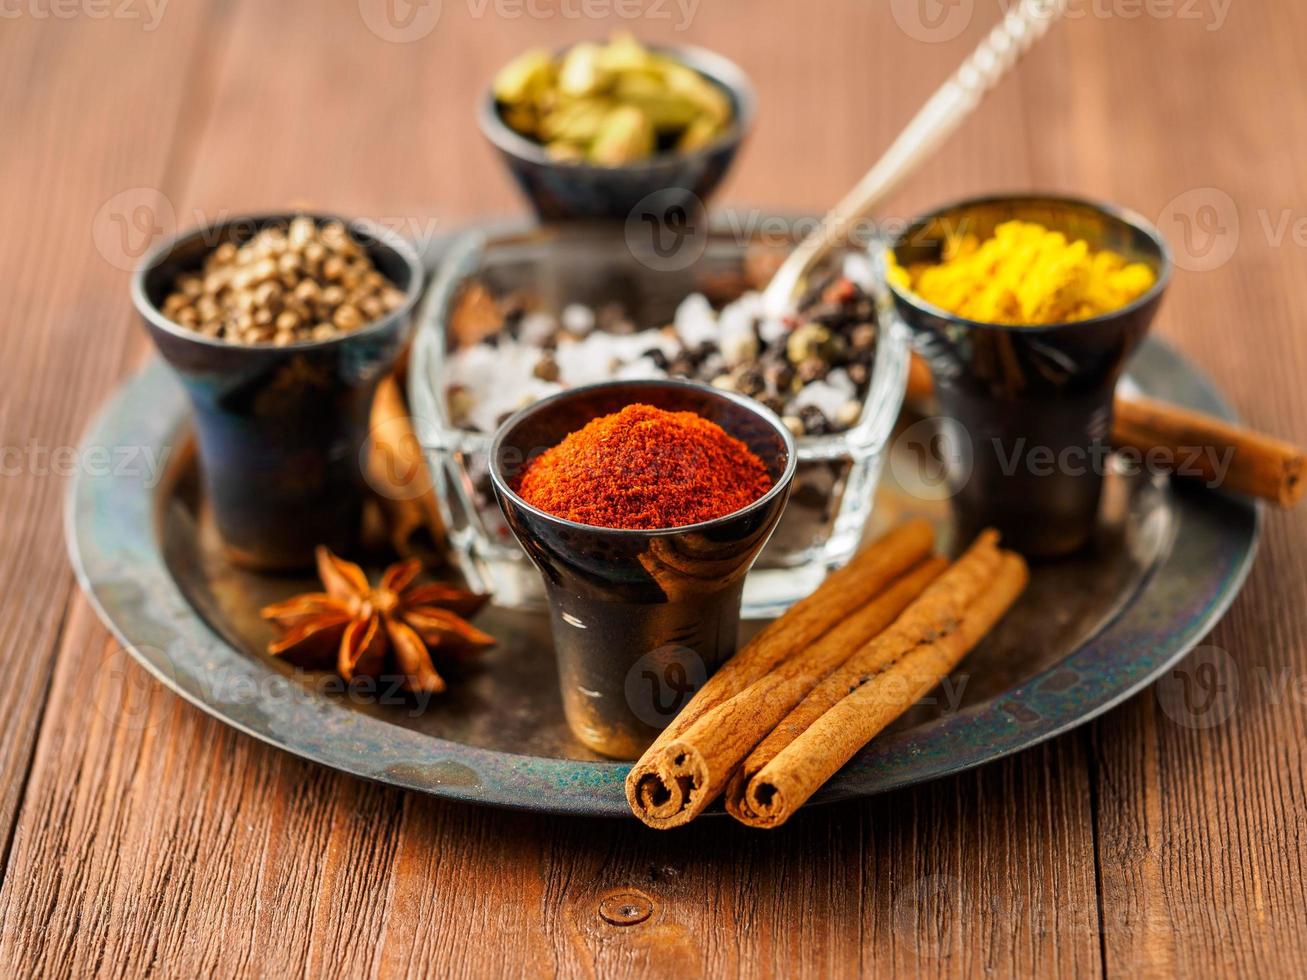 Oriental spice set - coriander, red pepper, turmeric, cinnamon, star anise, rosemary various seasonings in metall cups, on brown wooden table, side view, mcro, selective focus. photo